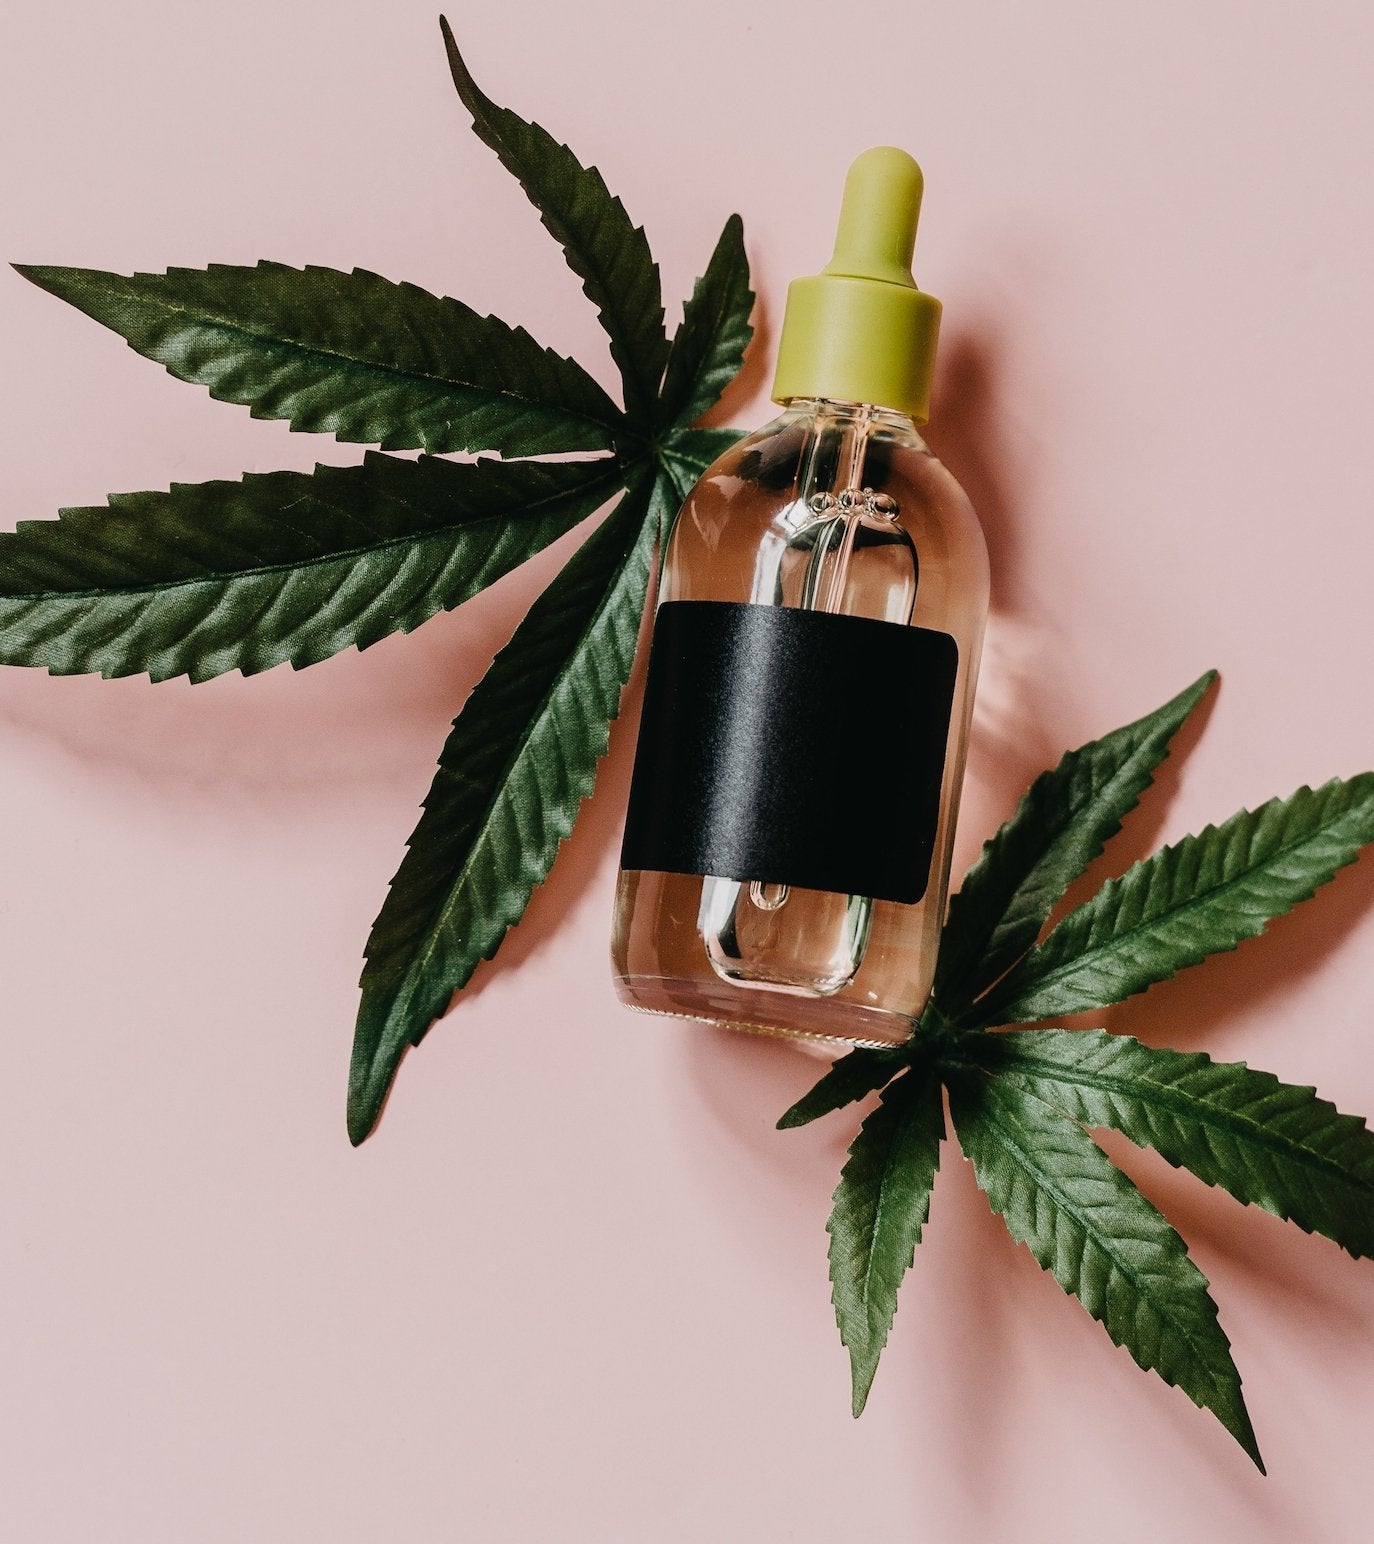 How To Choose The Right CBD Oil Strength - Erth Wellness